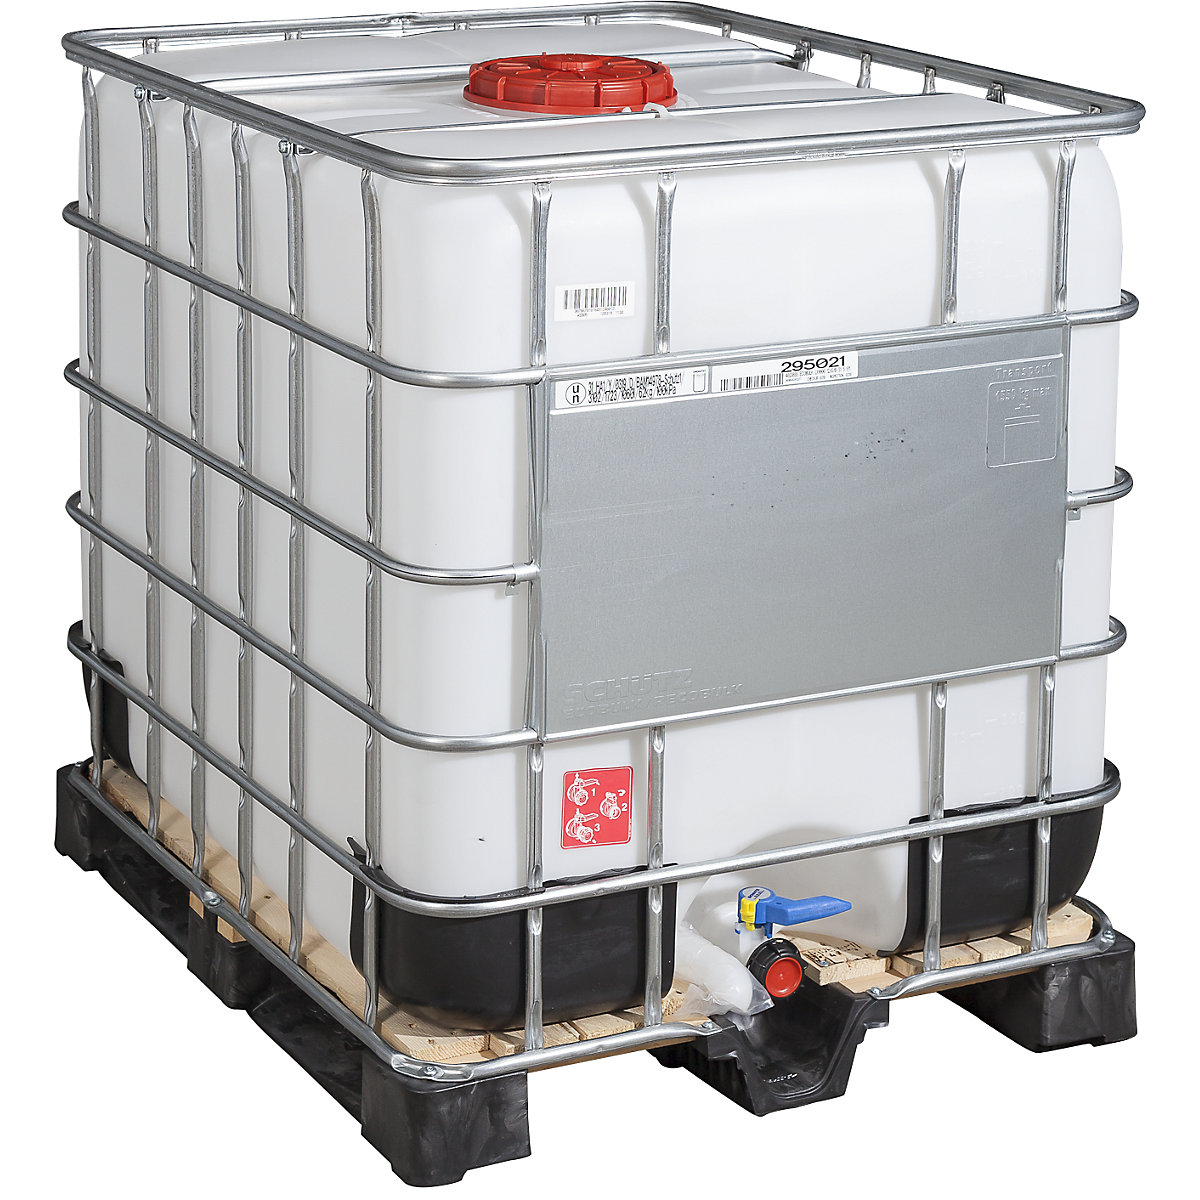 RECOBULK IBC container, UN approval